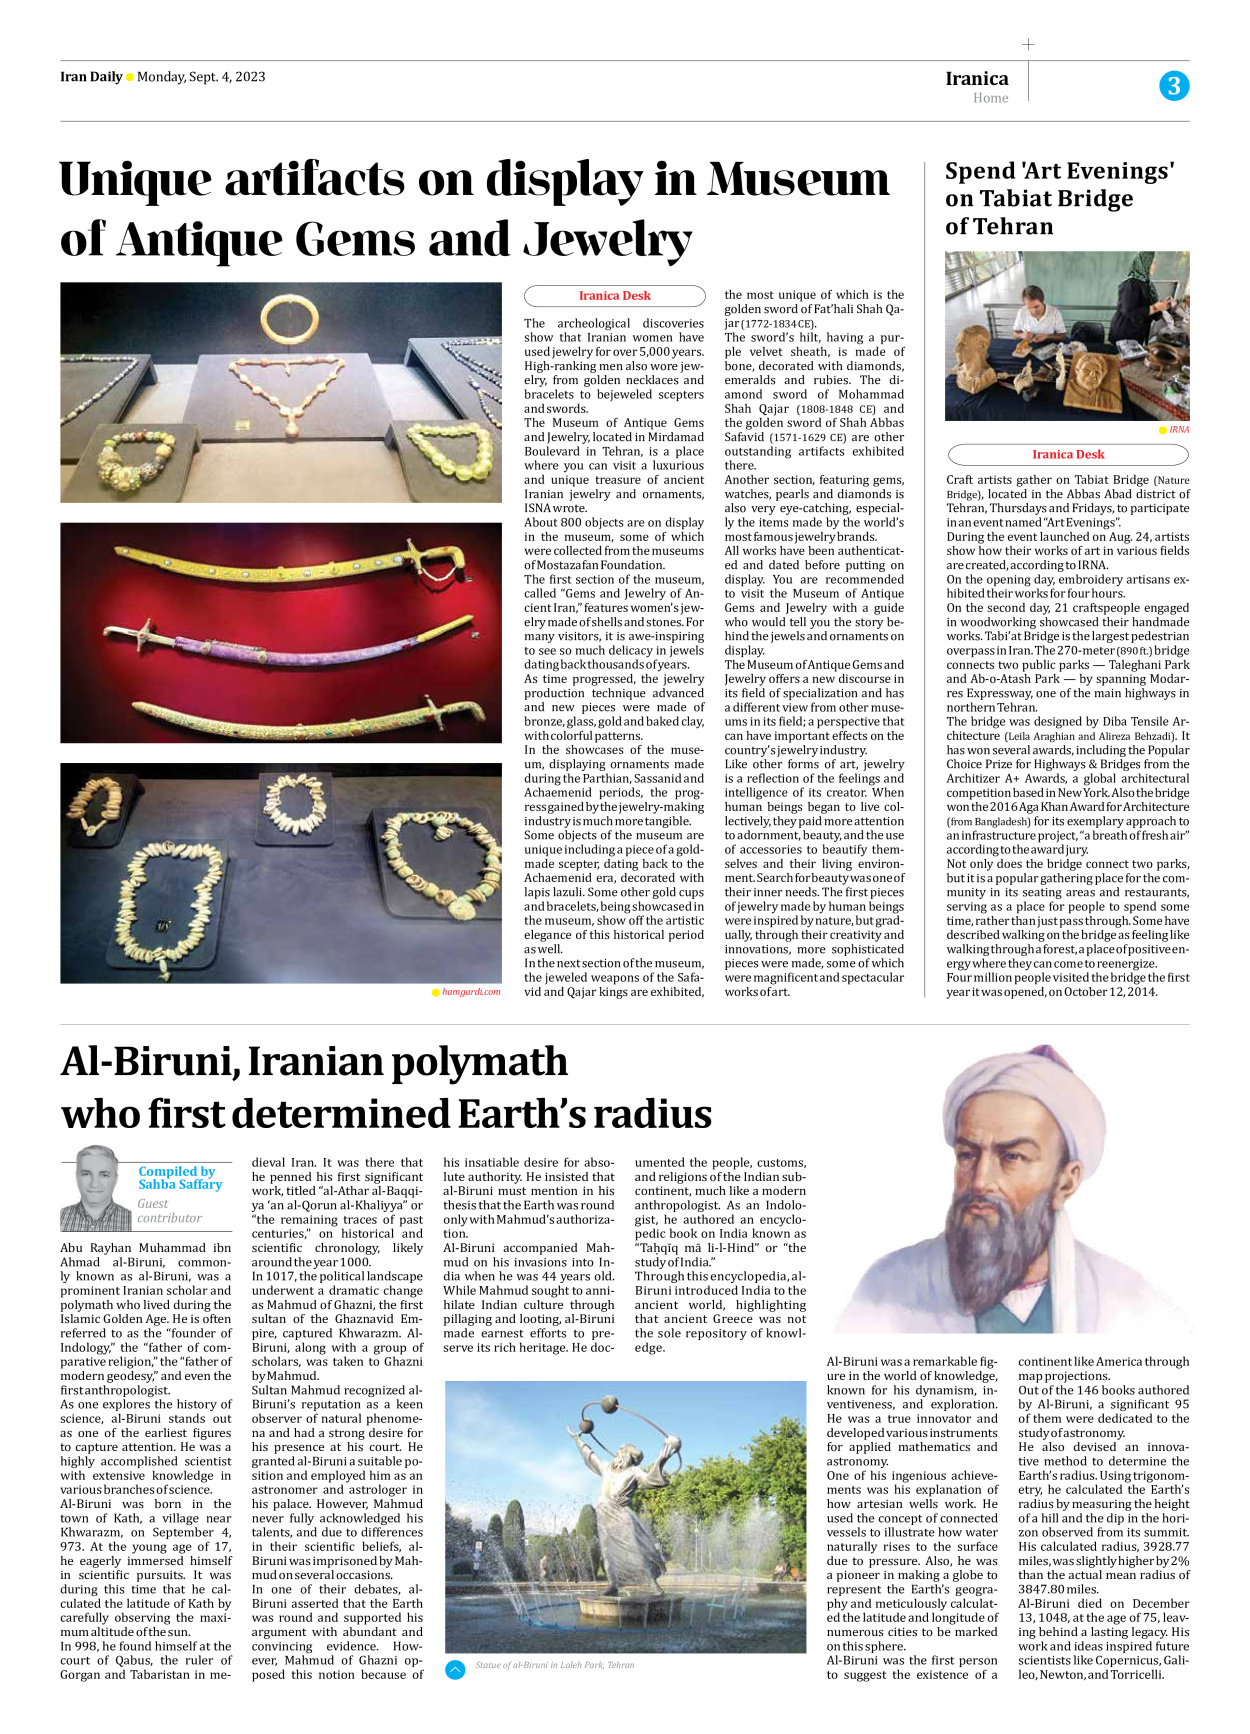 Iran Daily - Number Seven Thousand Three Hundred and Eighty - 04 September 2023 - Page 3